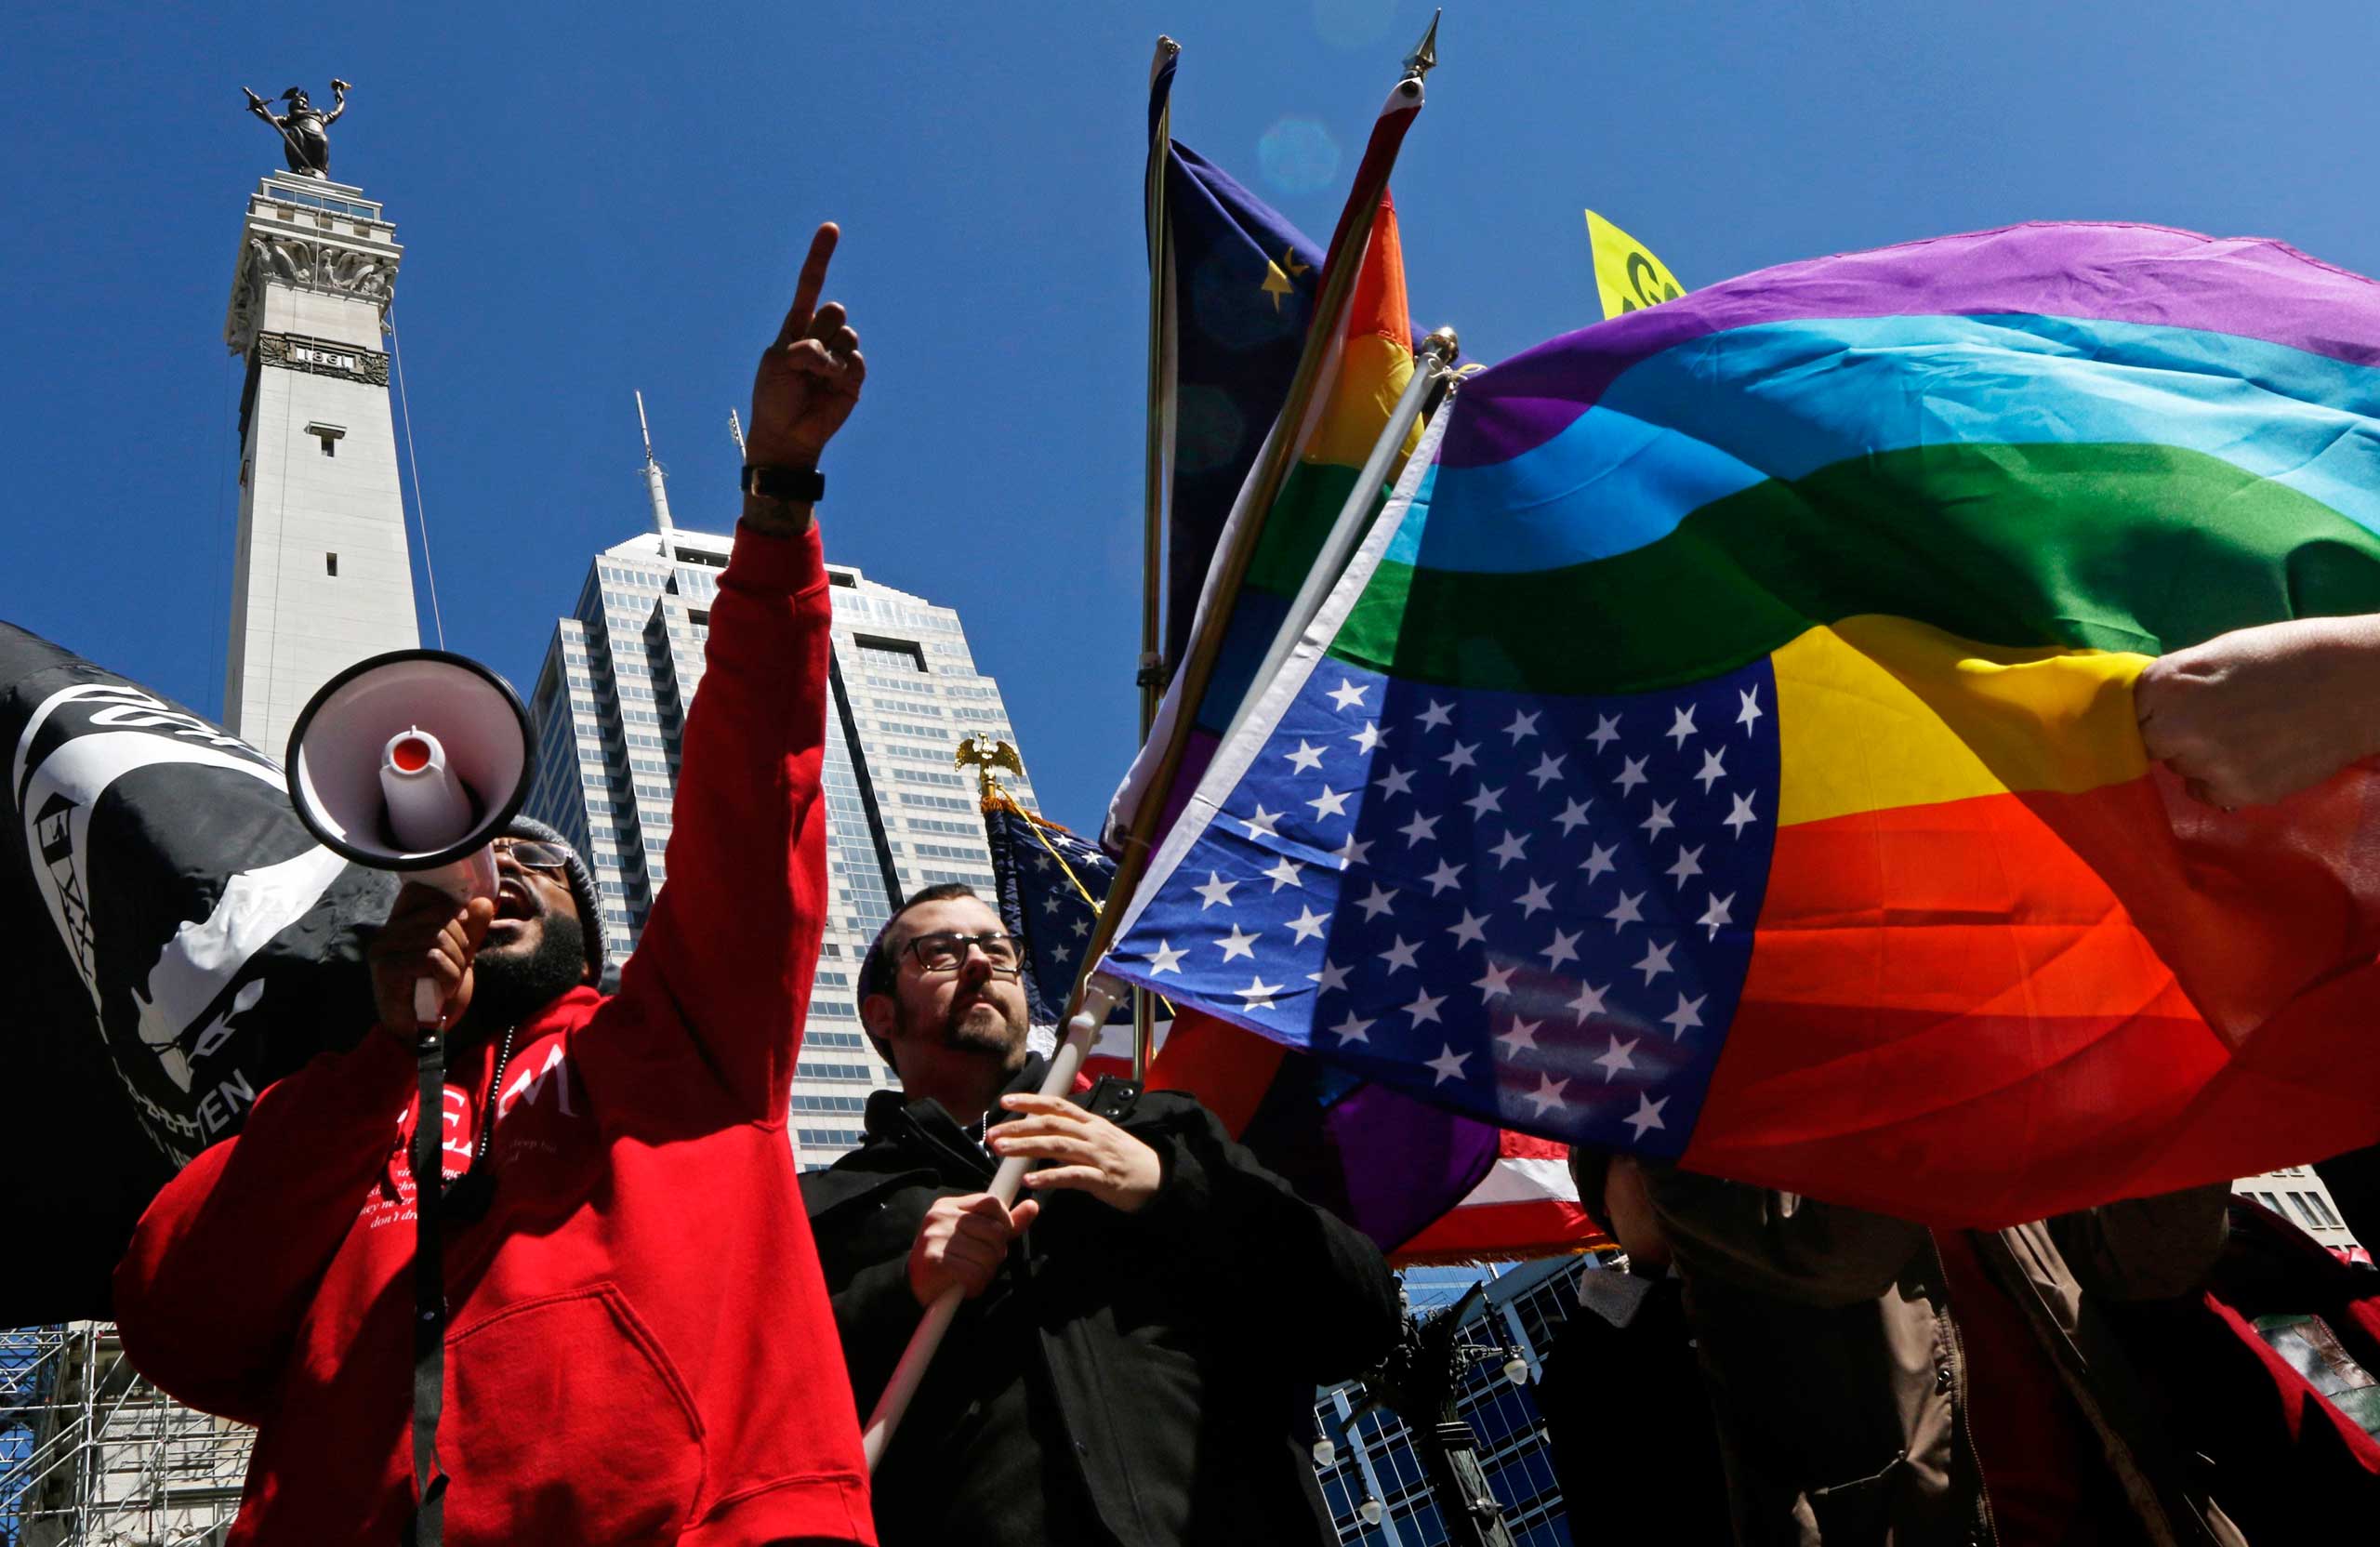 Organizers fire up a crowd of demonstrators gathered to protest a controversial religious freedom bill recently signed by Governor Mike Pence, in Indianapolis March 28, 2015.